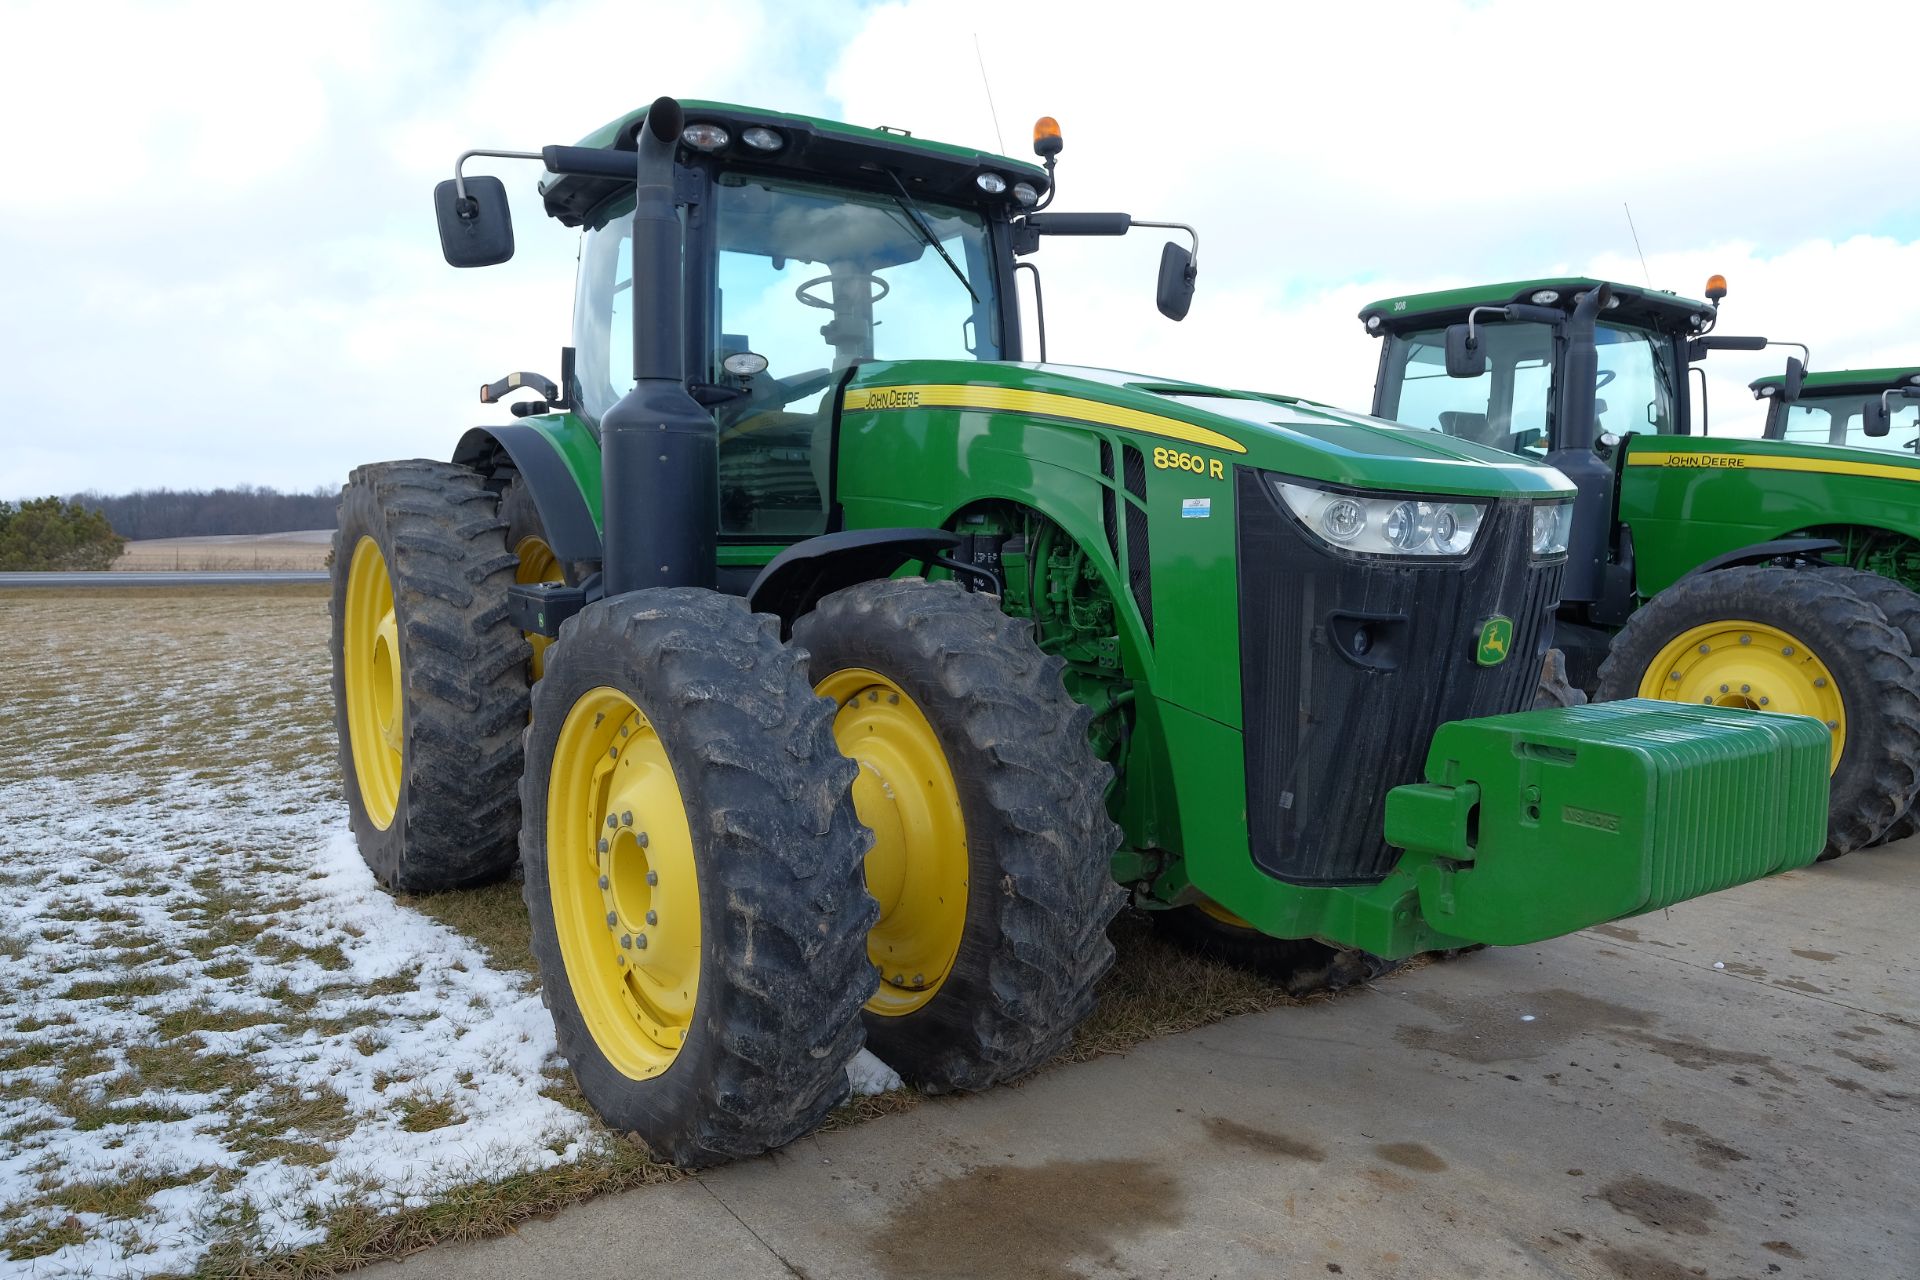 John Deere Tractor 8360 (2012) - 1RW8360RPCD057229 - 2,525 hours, 360 hp,mwfd, ivt transmission with - Image 7 of 14